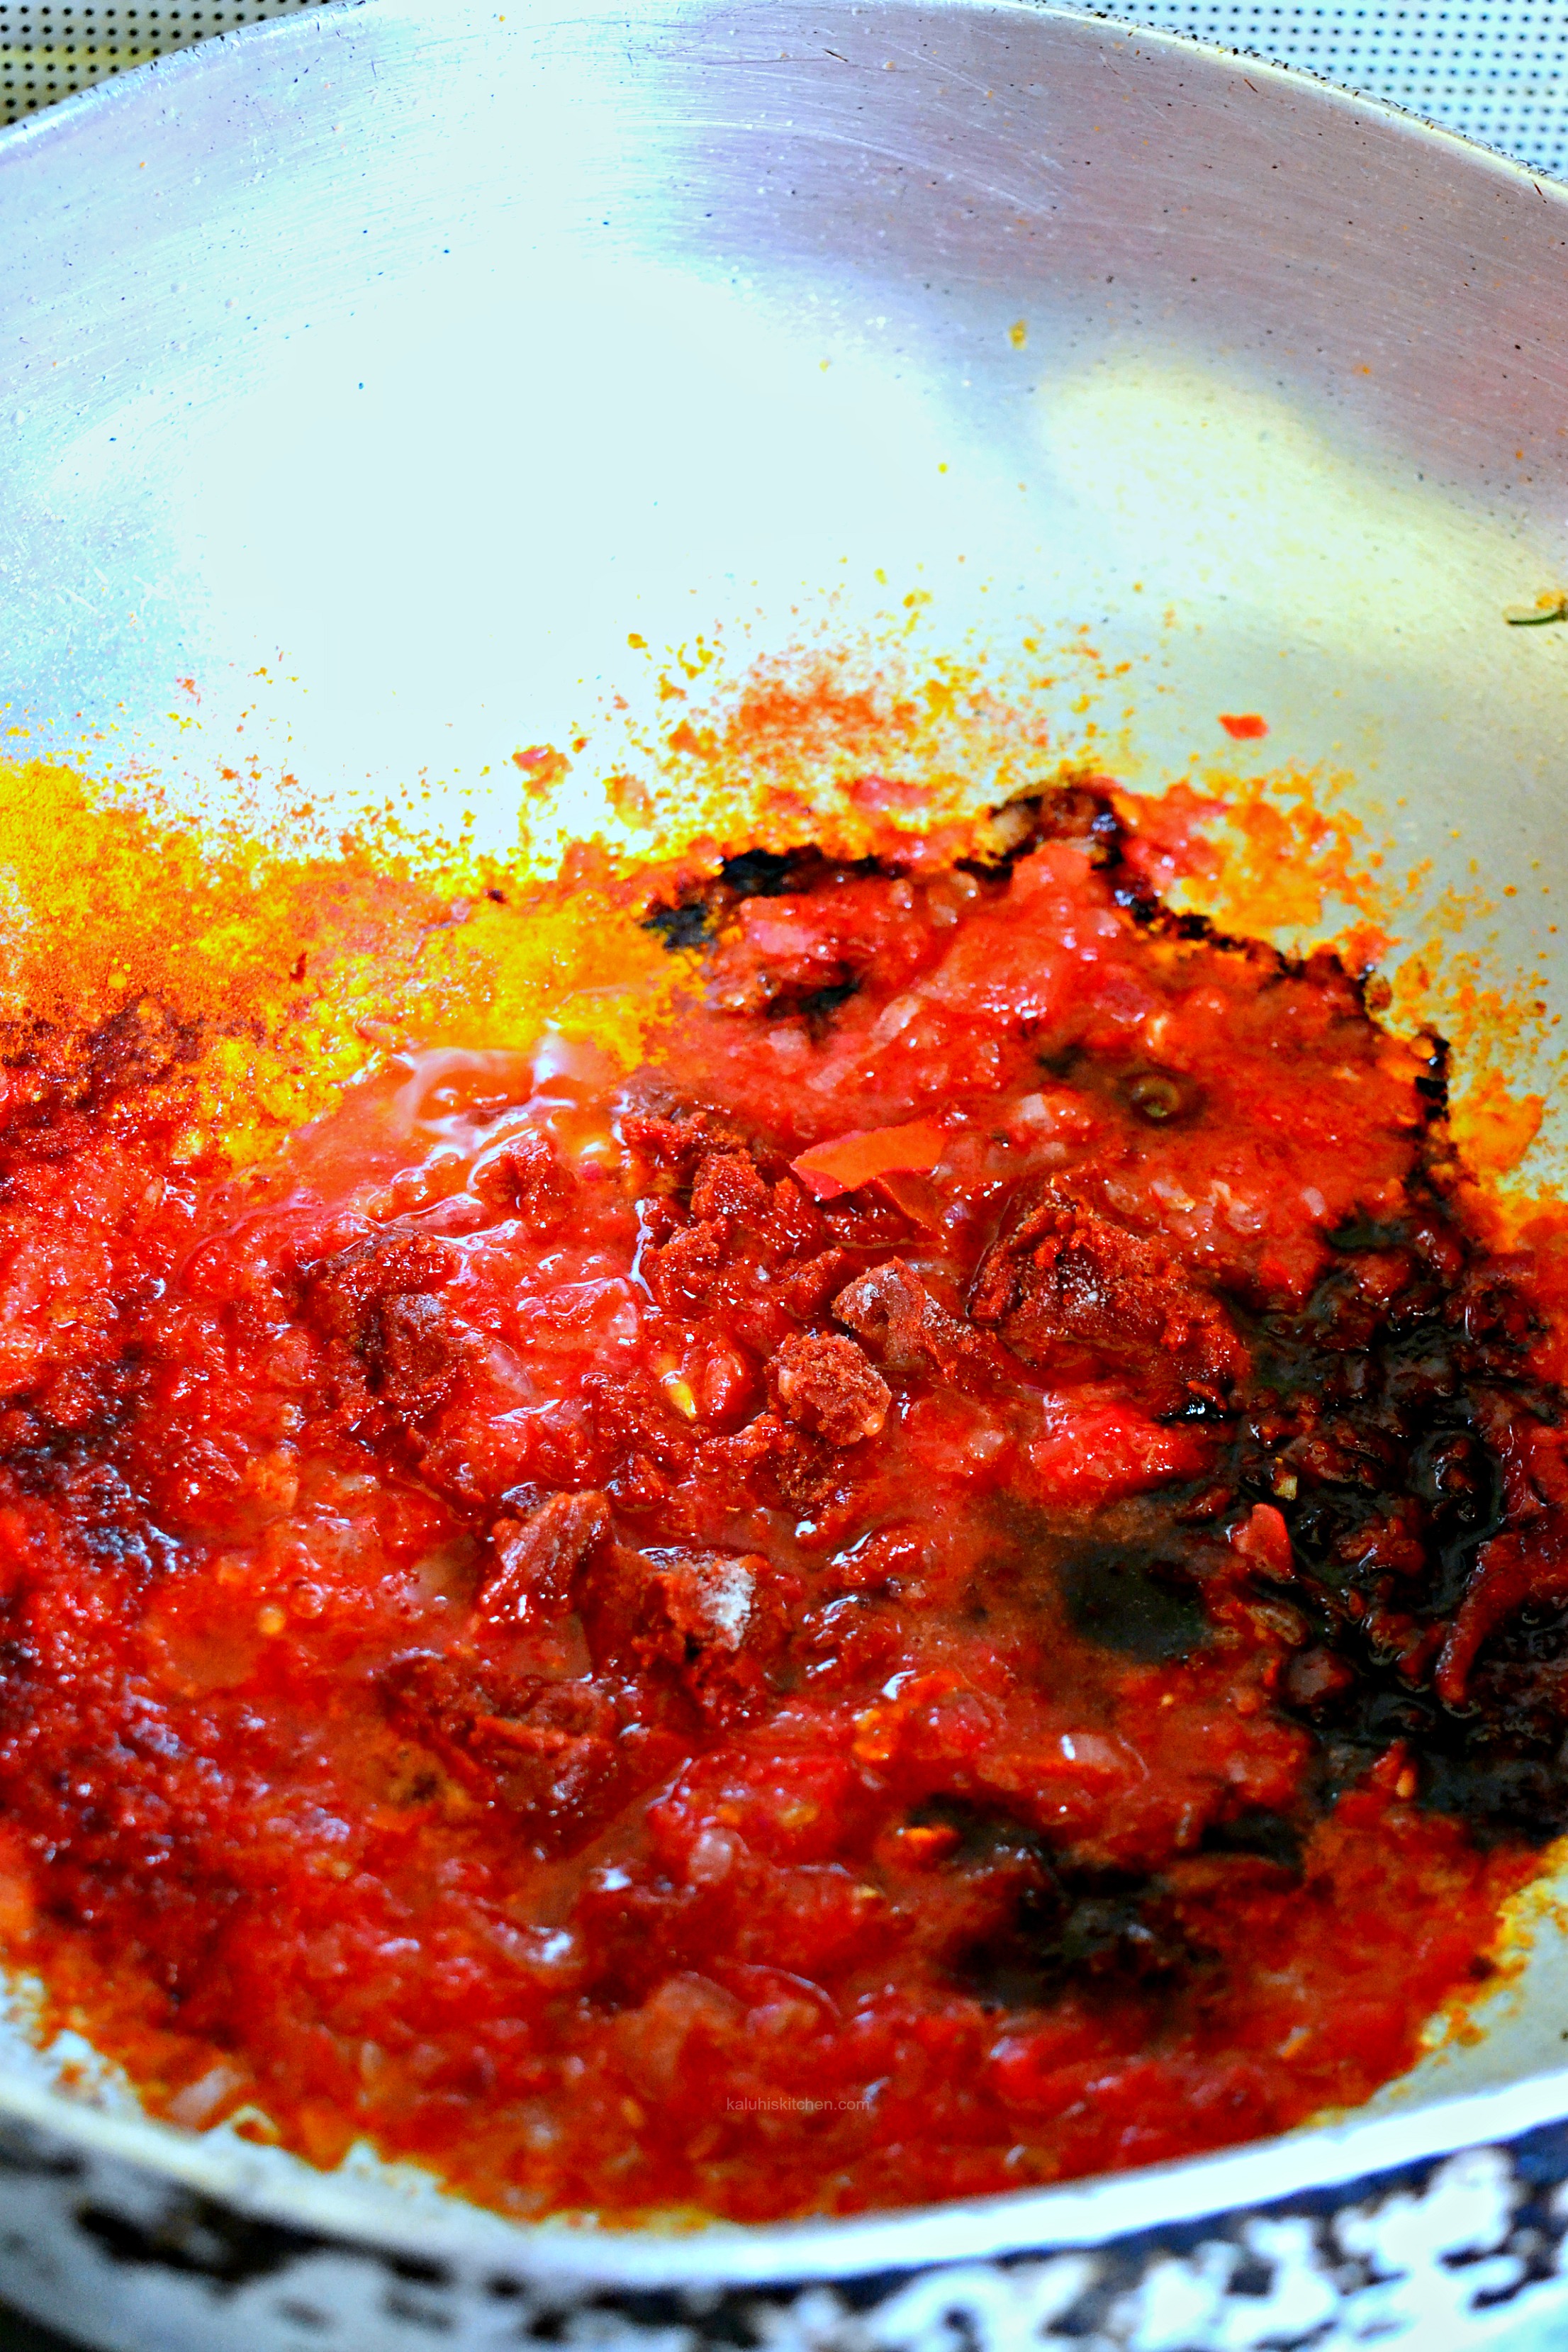 for-the-sauce-add-tomatoes-tomato-paste-the-spices-and-soy-sauce-to-the-sauteed-red-onion-and-allow-it-to-sommer-down-so-that-all-the-flavors-combine_kaluhiskitchen-com